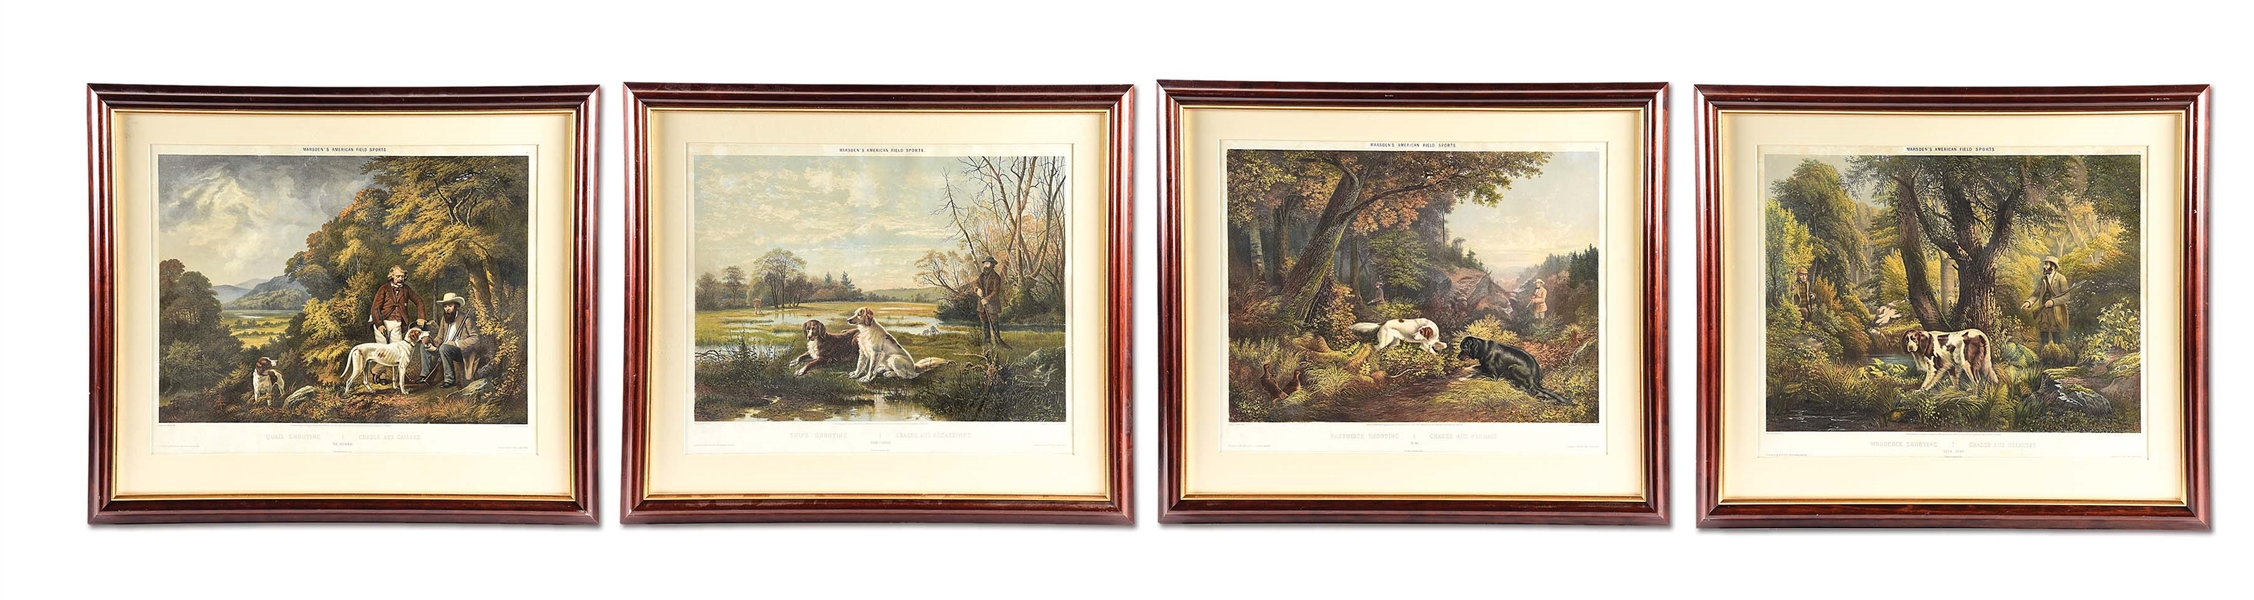 VERY SCARCE COMPLETE SET OF FOUR WILLIAM MARDENS 1857 AMERICAN FIELD SPORTS HAND COLORED LITHOGRAPH PRINTS.